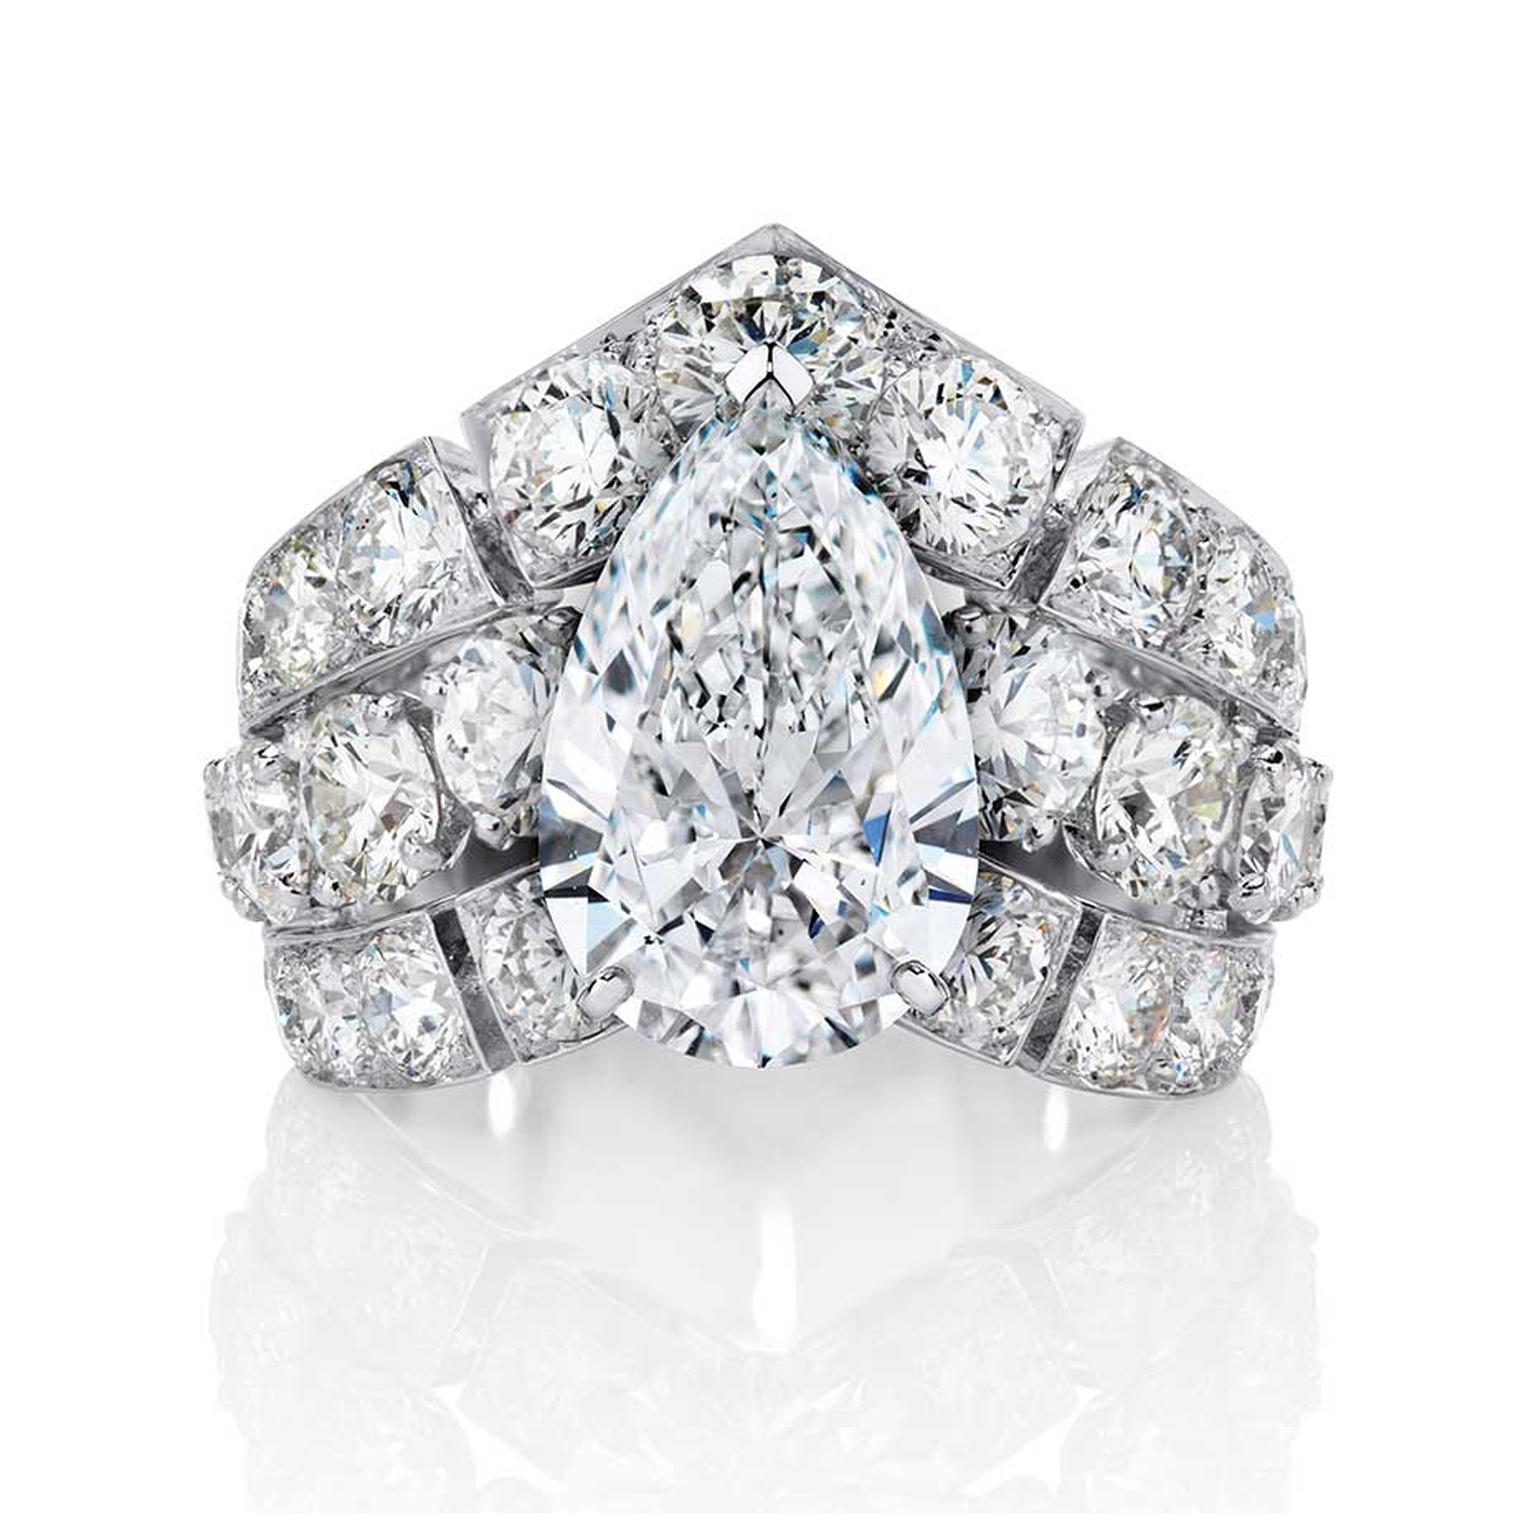 De Beers Phenomena Frost oval-cut diamond ring, set with diamonds totalling more than 8ct.